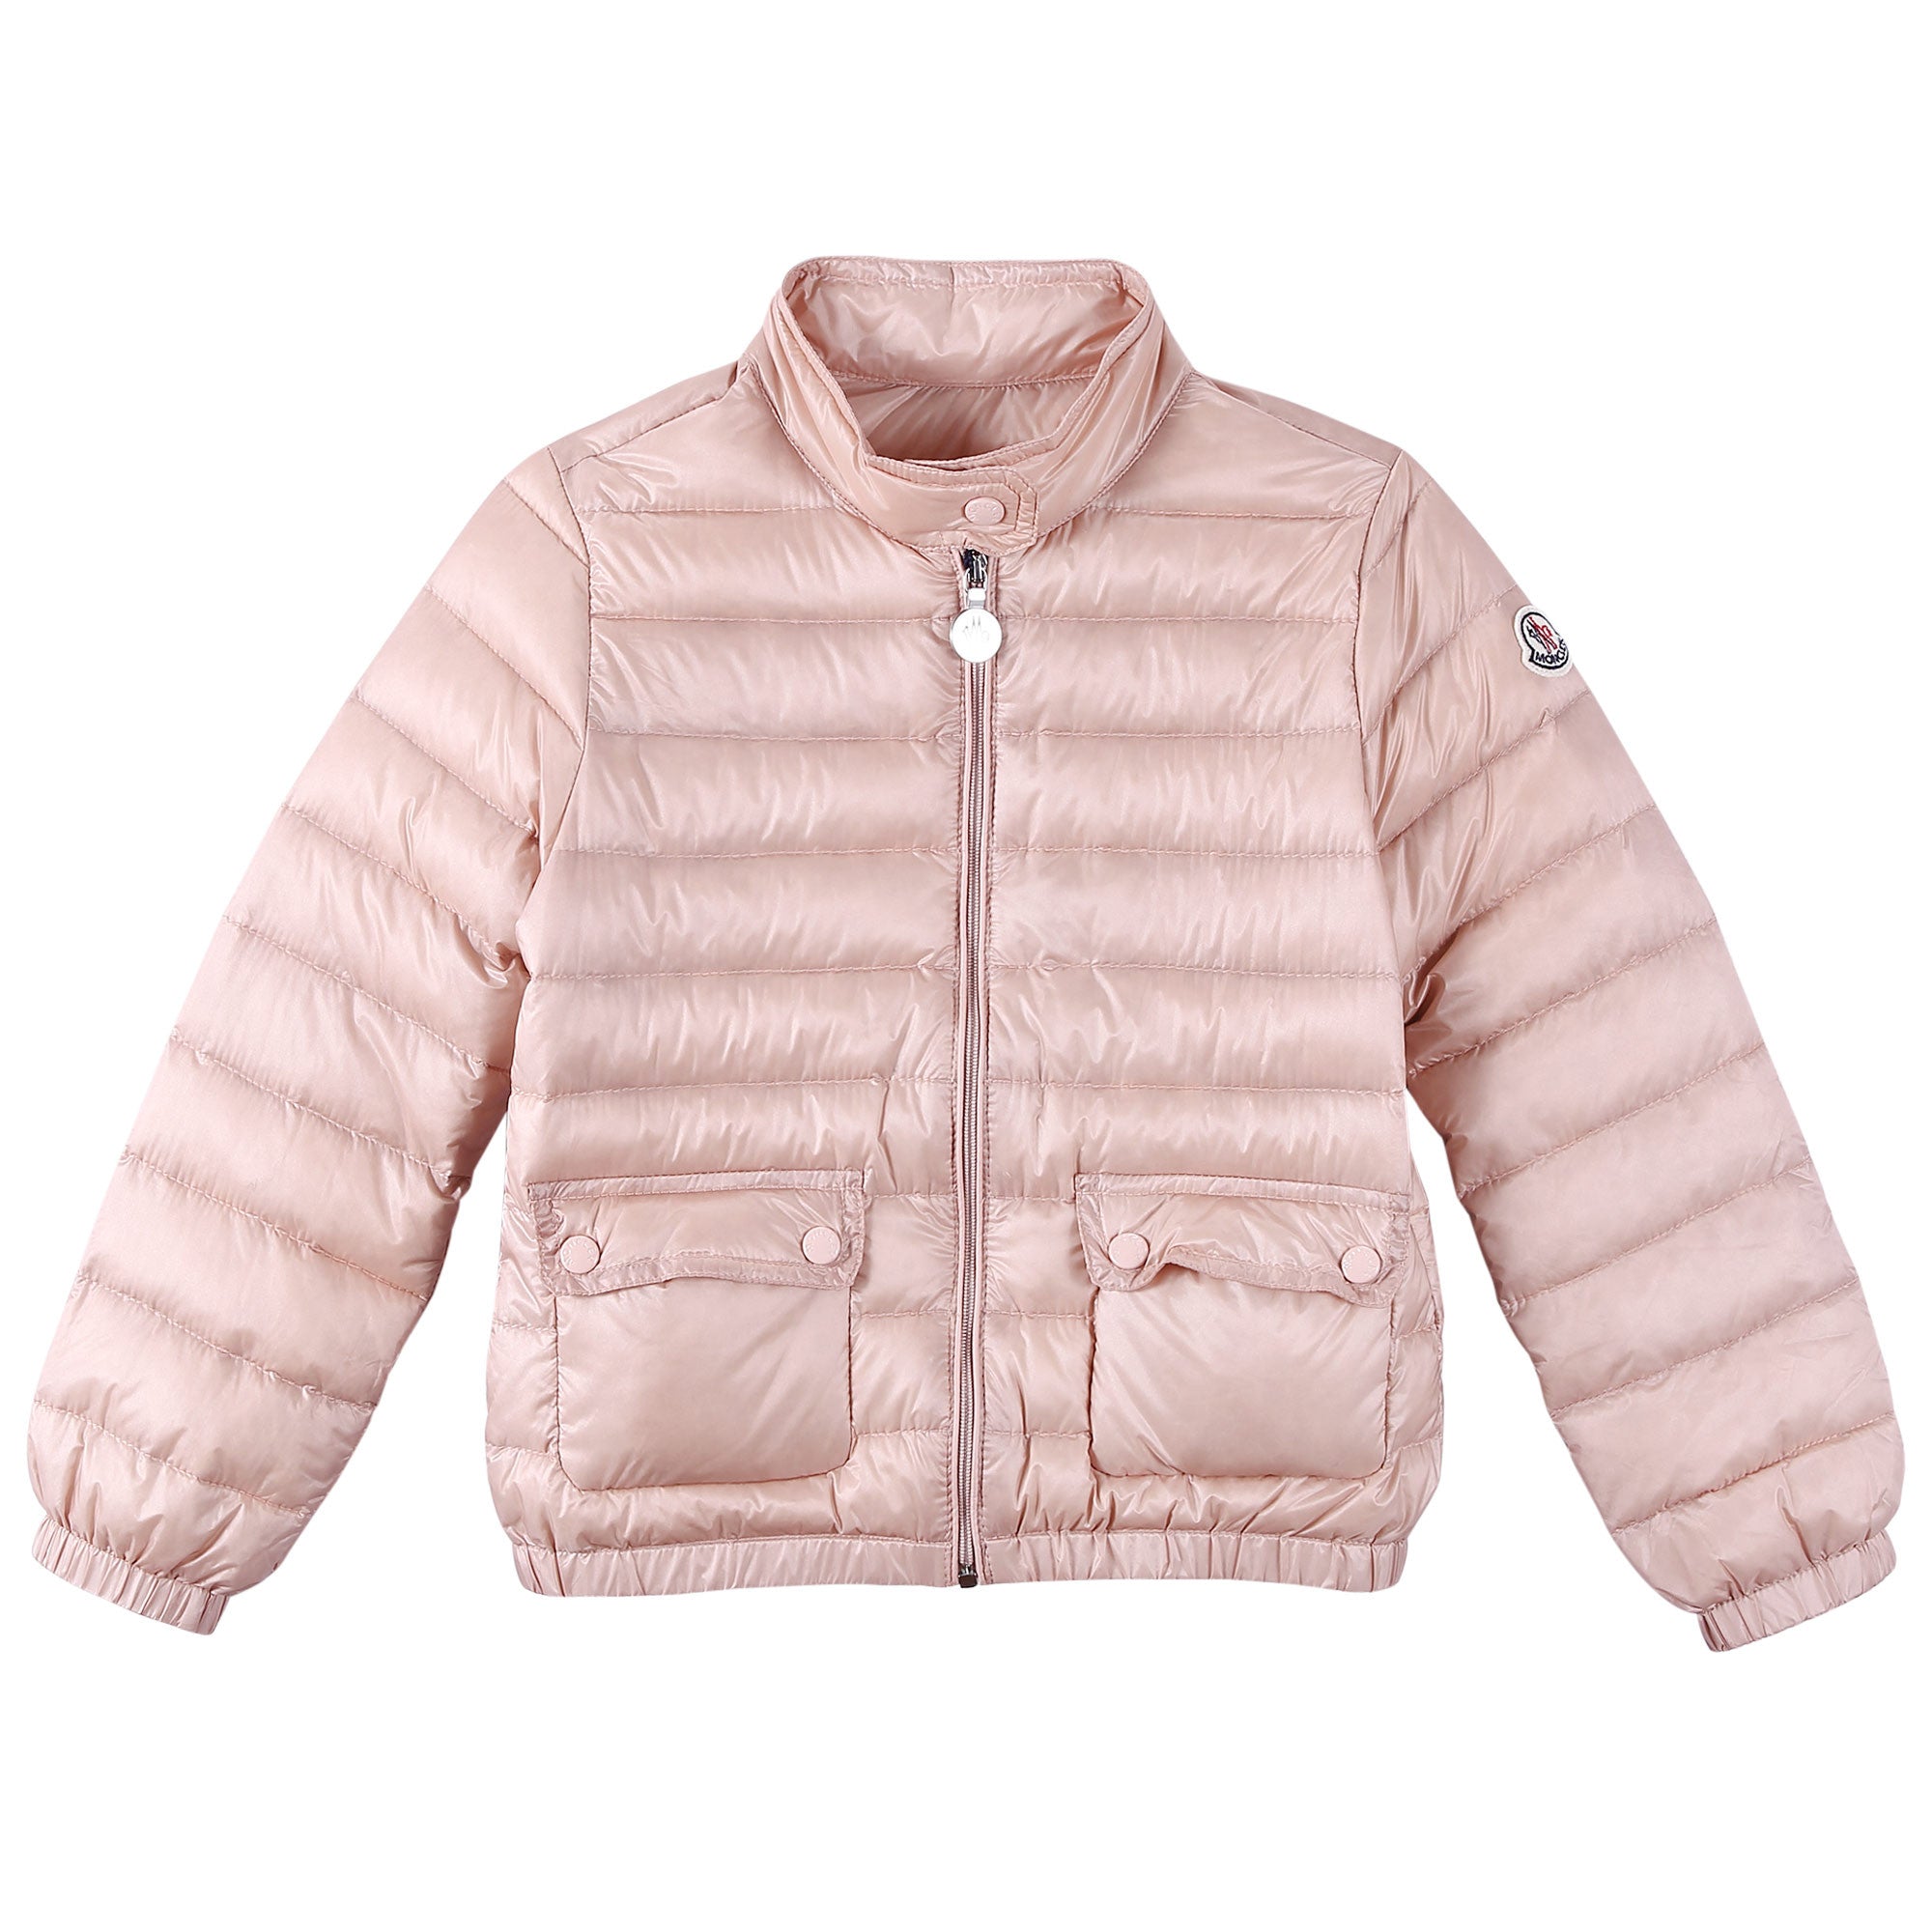 Girls Bright Pink Down Padded 'Lans' Jacket With Patch Pocket - CÉMAROSE | Children's Fashion Store - 1